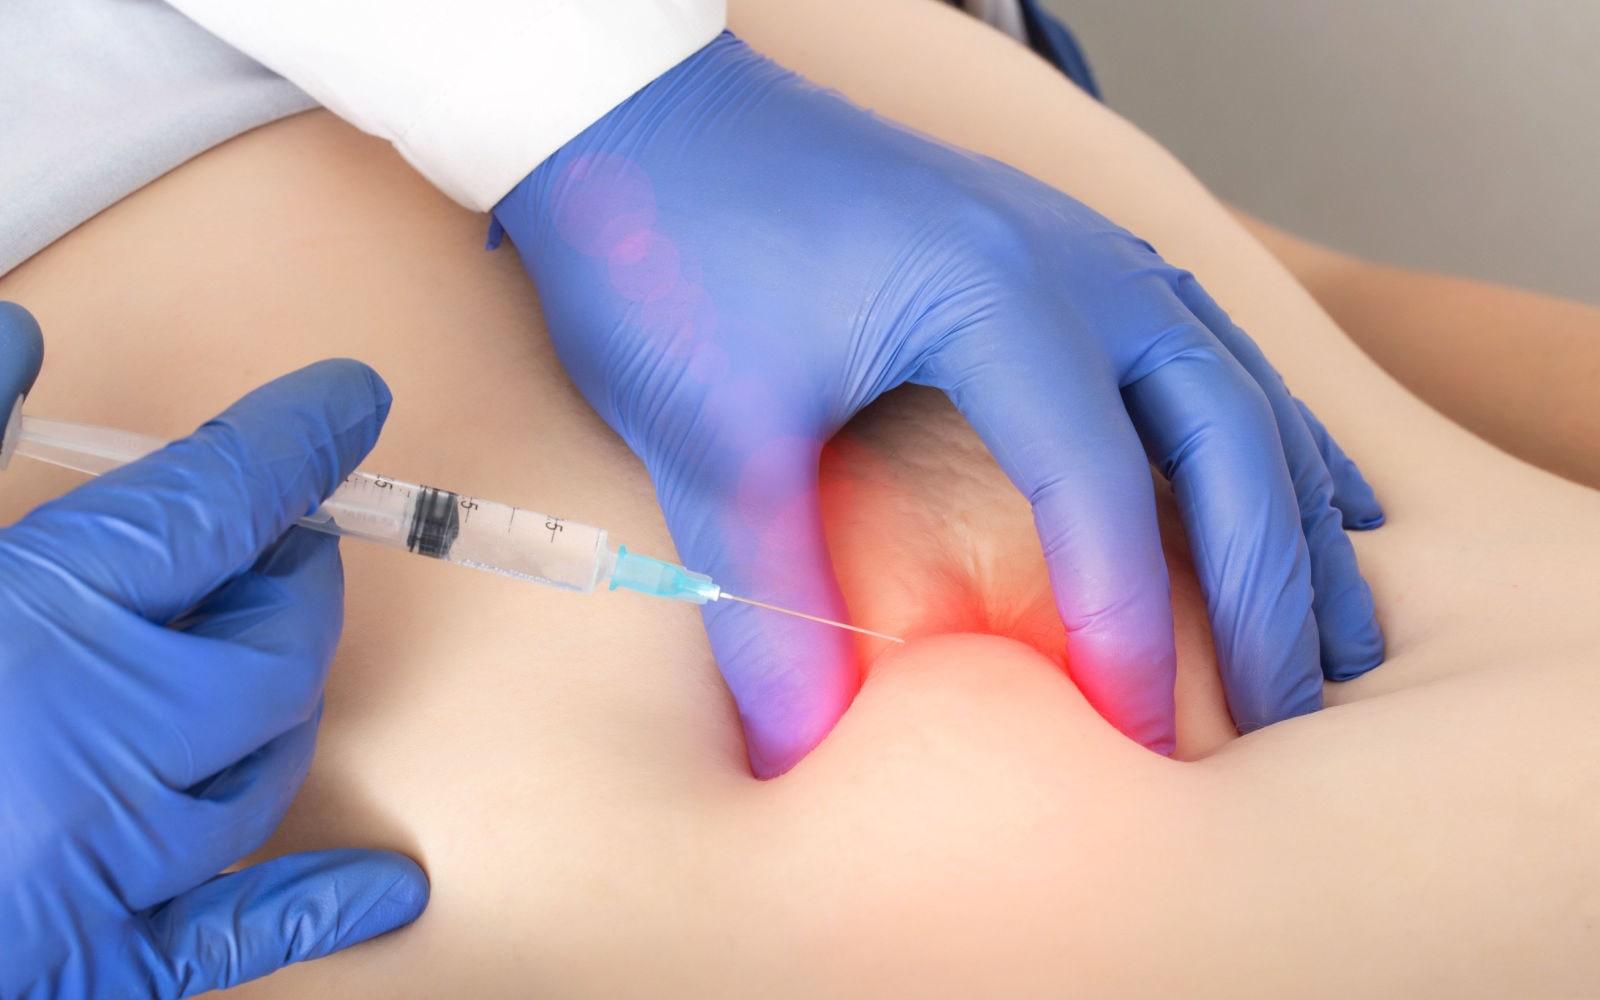 Epidural Steroid Injections in Lower Back